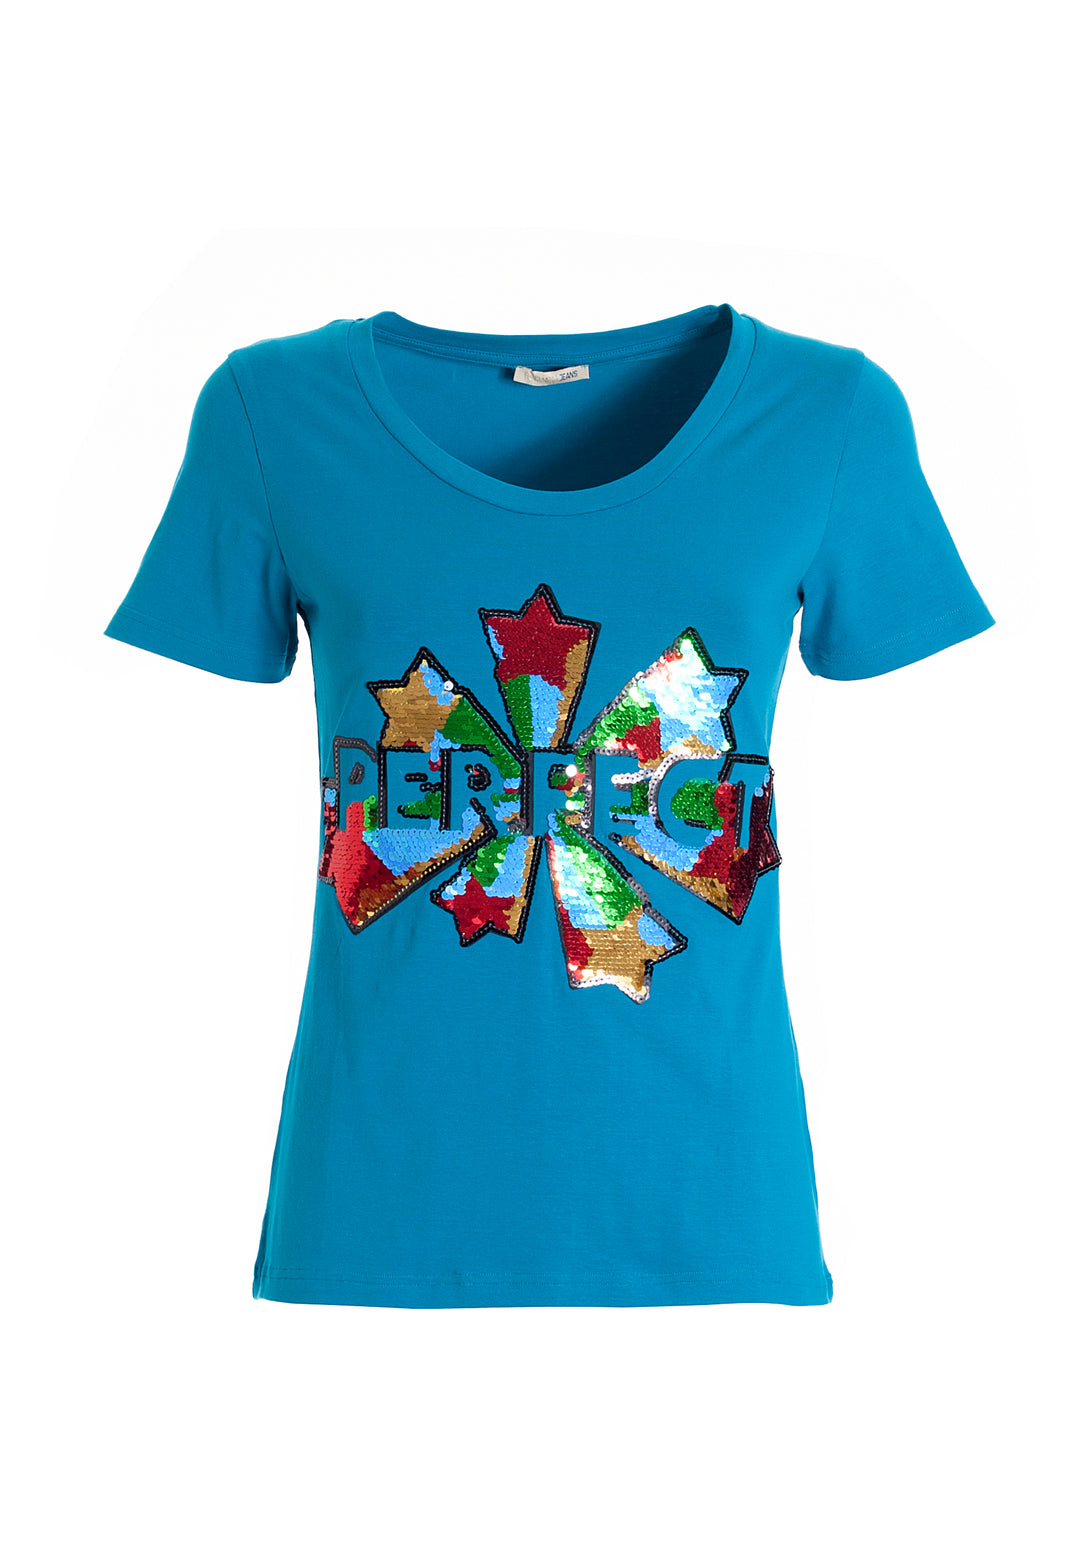 T-shirt regular fit made in cotton jersey with sequins pattern Fracomina FP21WT3002J401N5-268